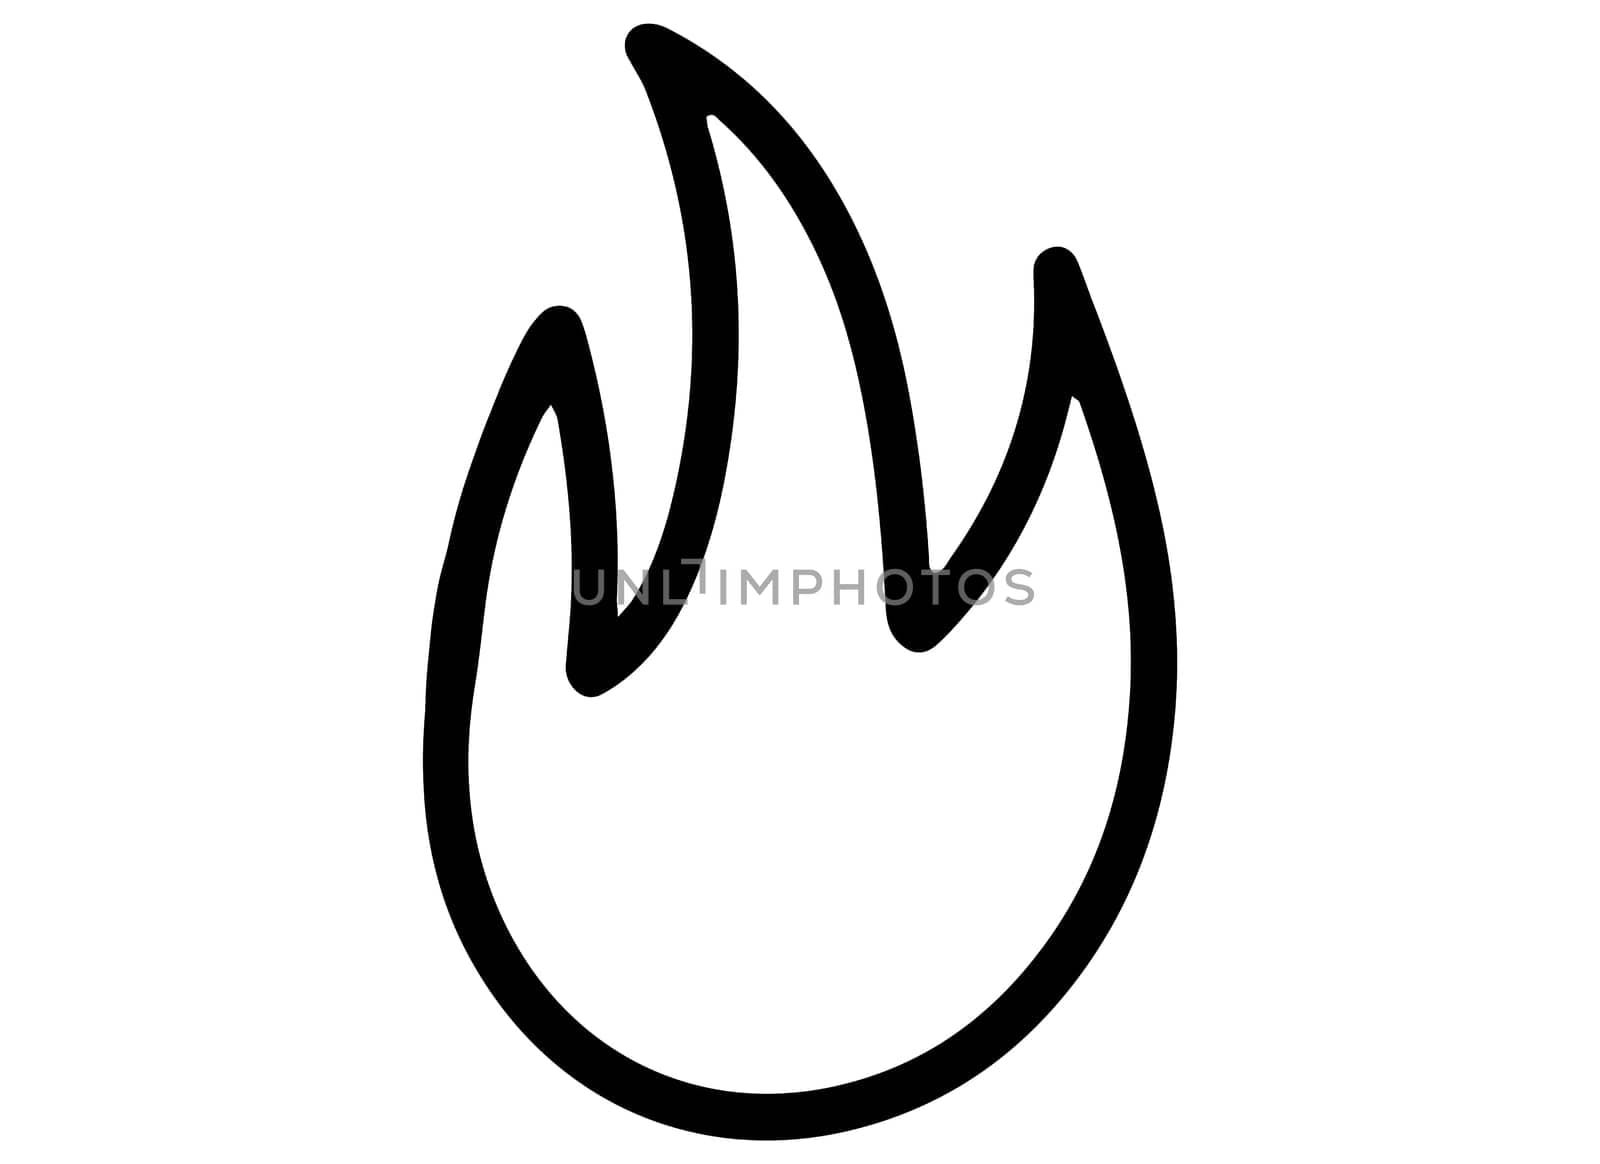 Printable Coloring Page for Kids. Black and White Fire Icon Isolated Illustration. Coloring Book with Fire Logo.